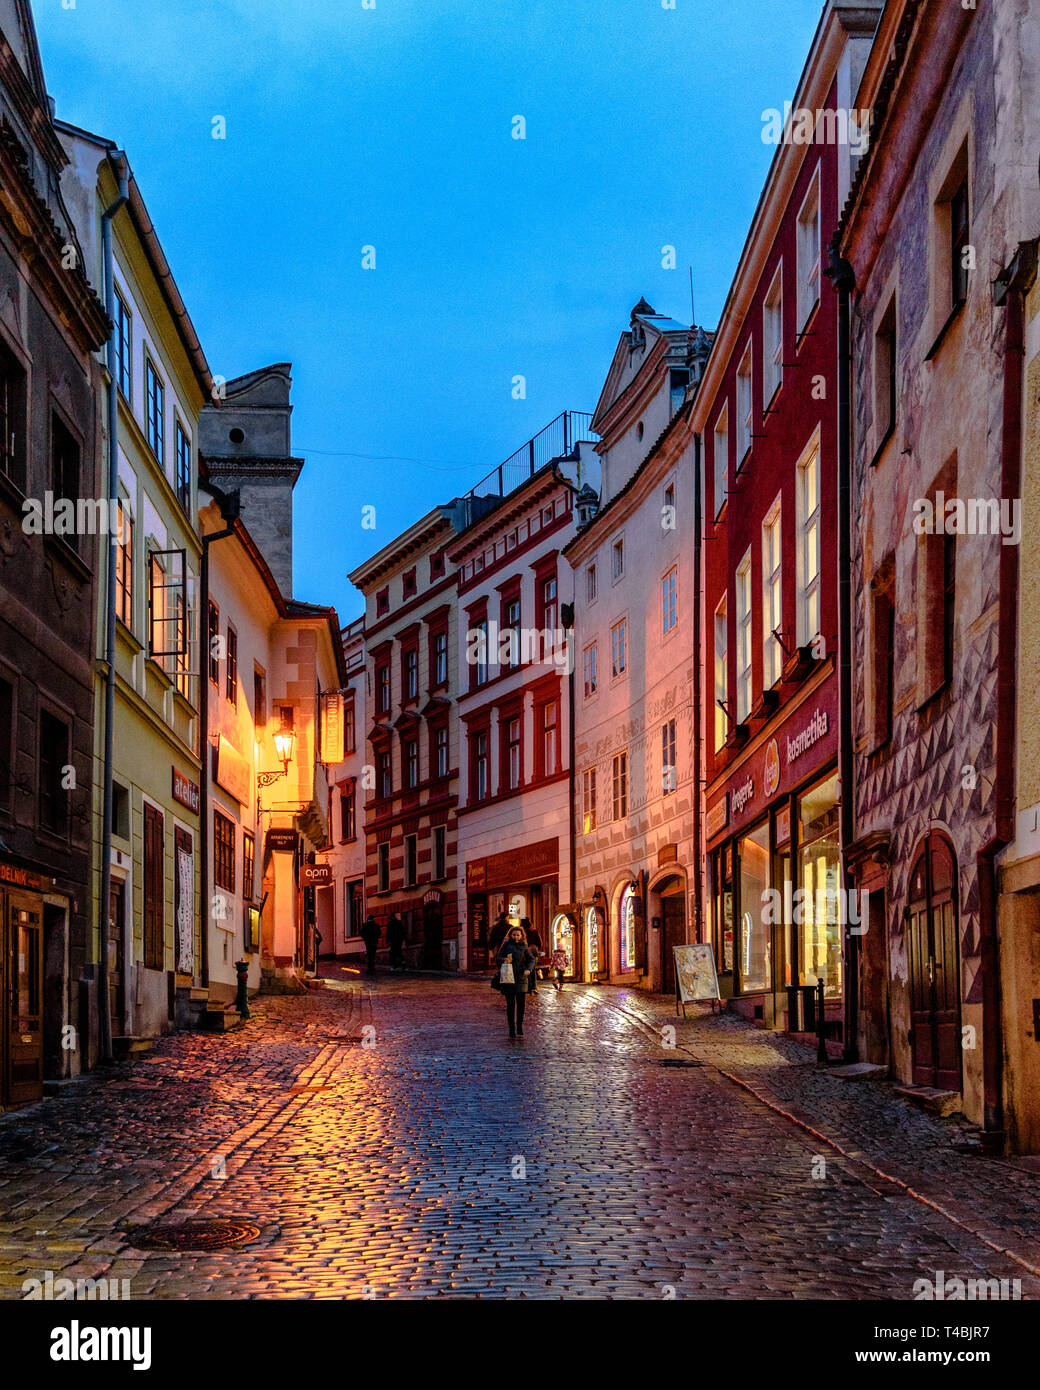 A street with wet cobblestones in the old town of Cesky Krumlov at dusk Stock Photo